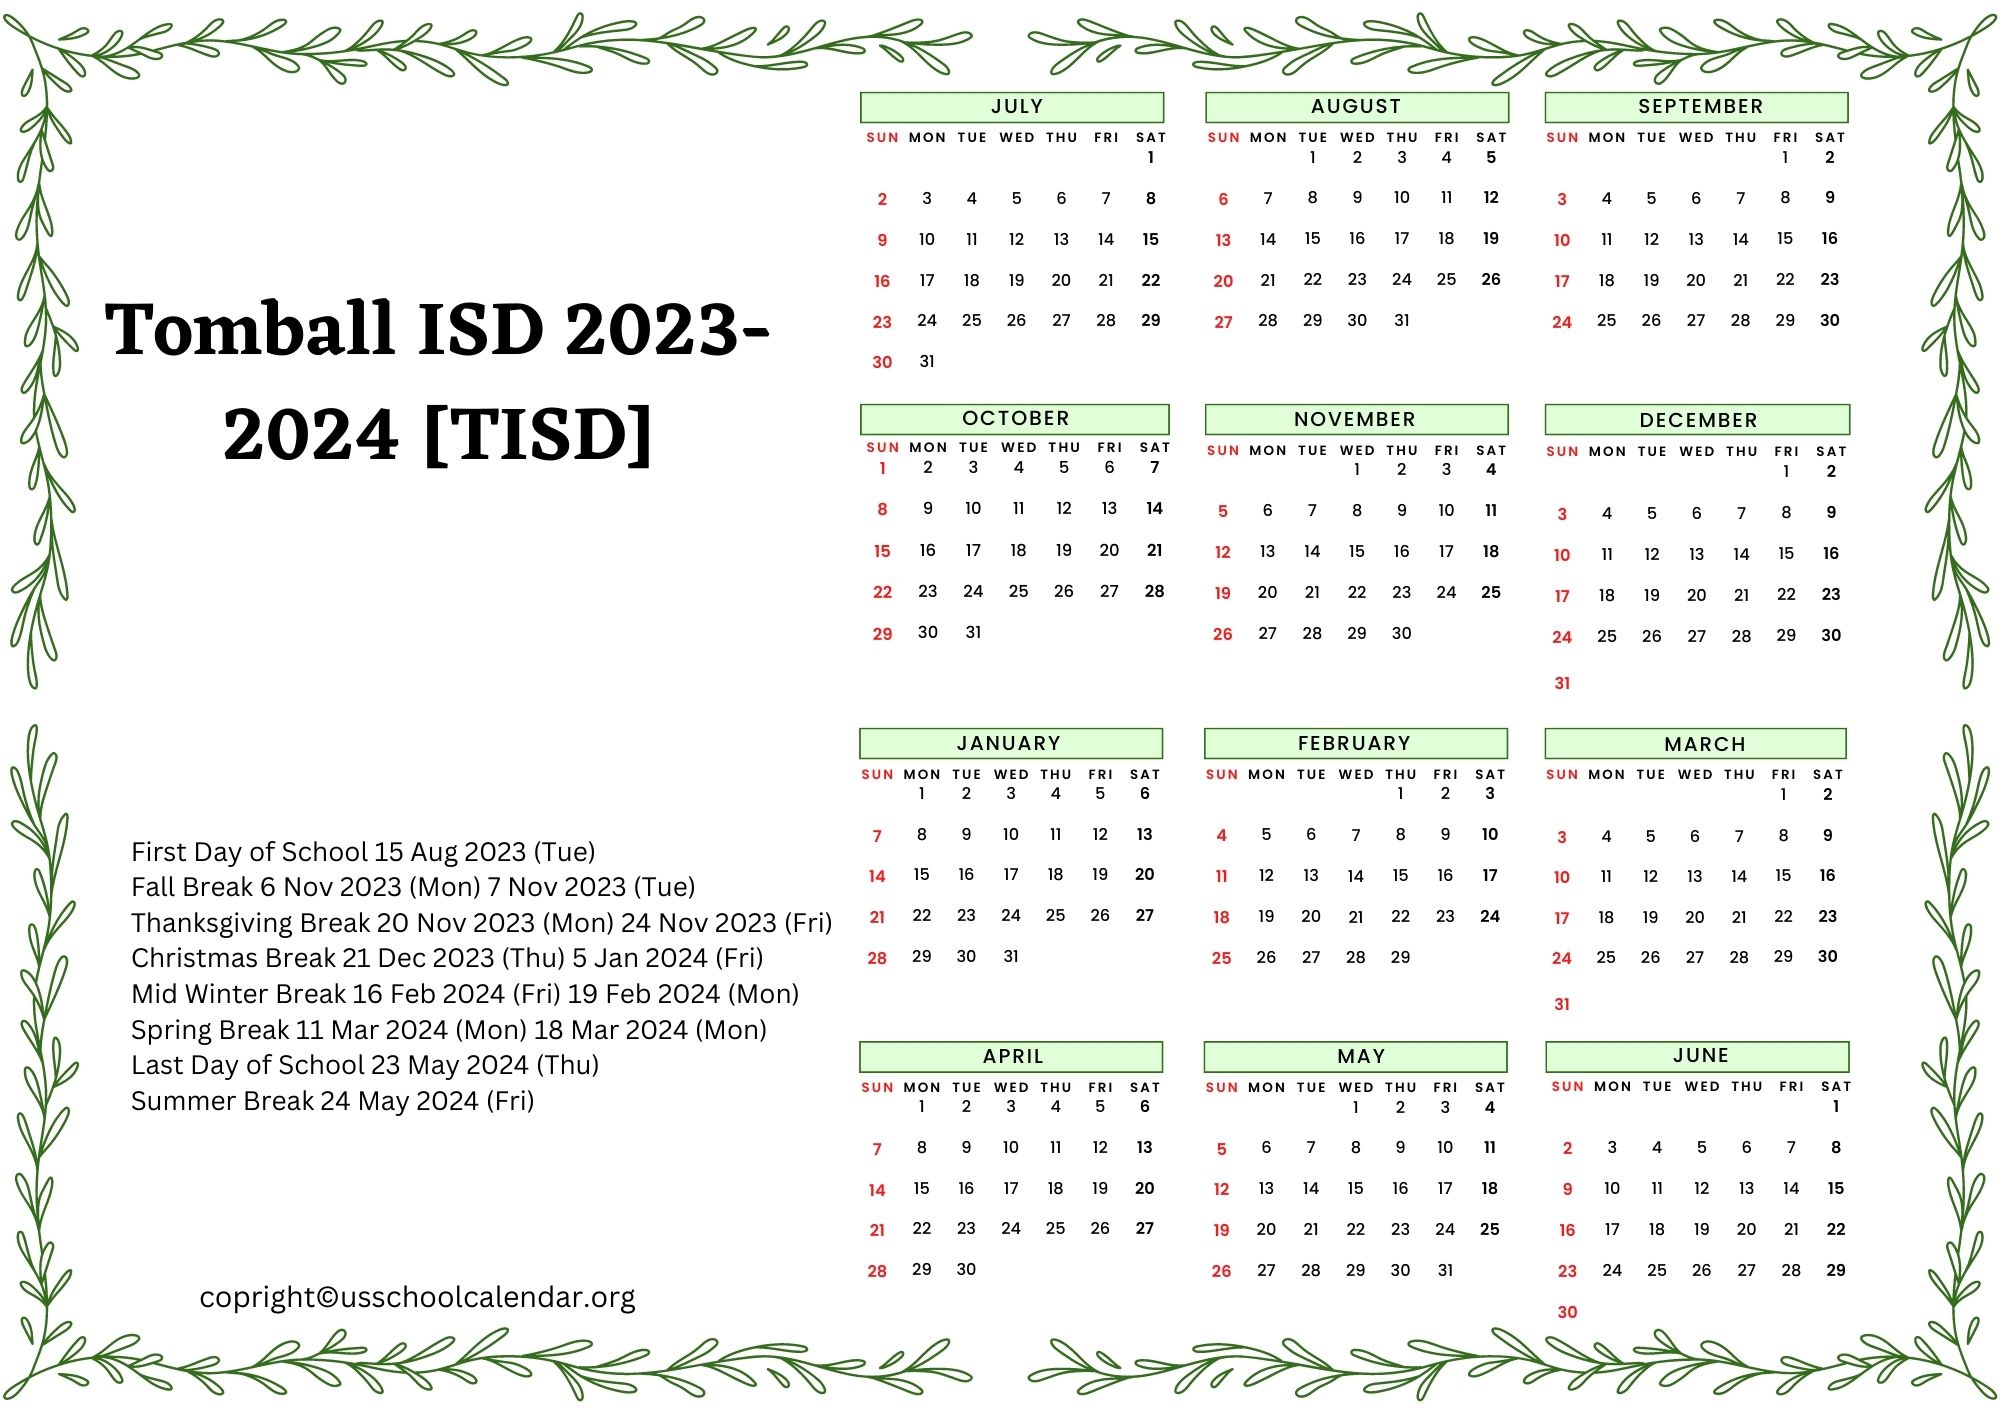 tomball-isd-calendar-with-holidays-2023-2024-tisd